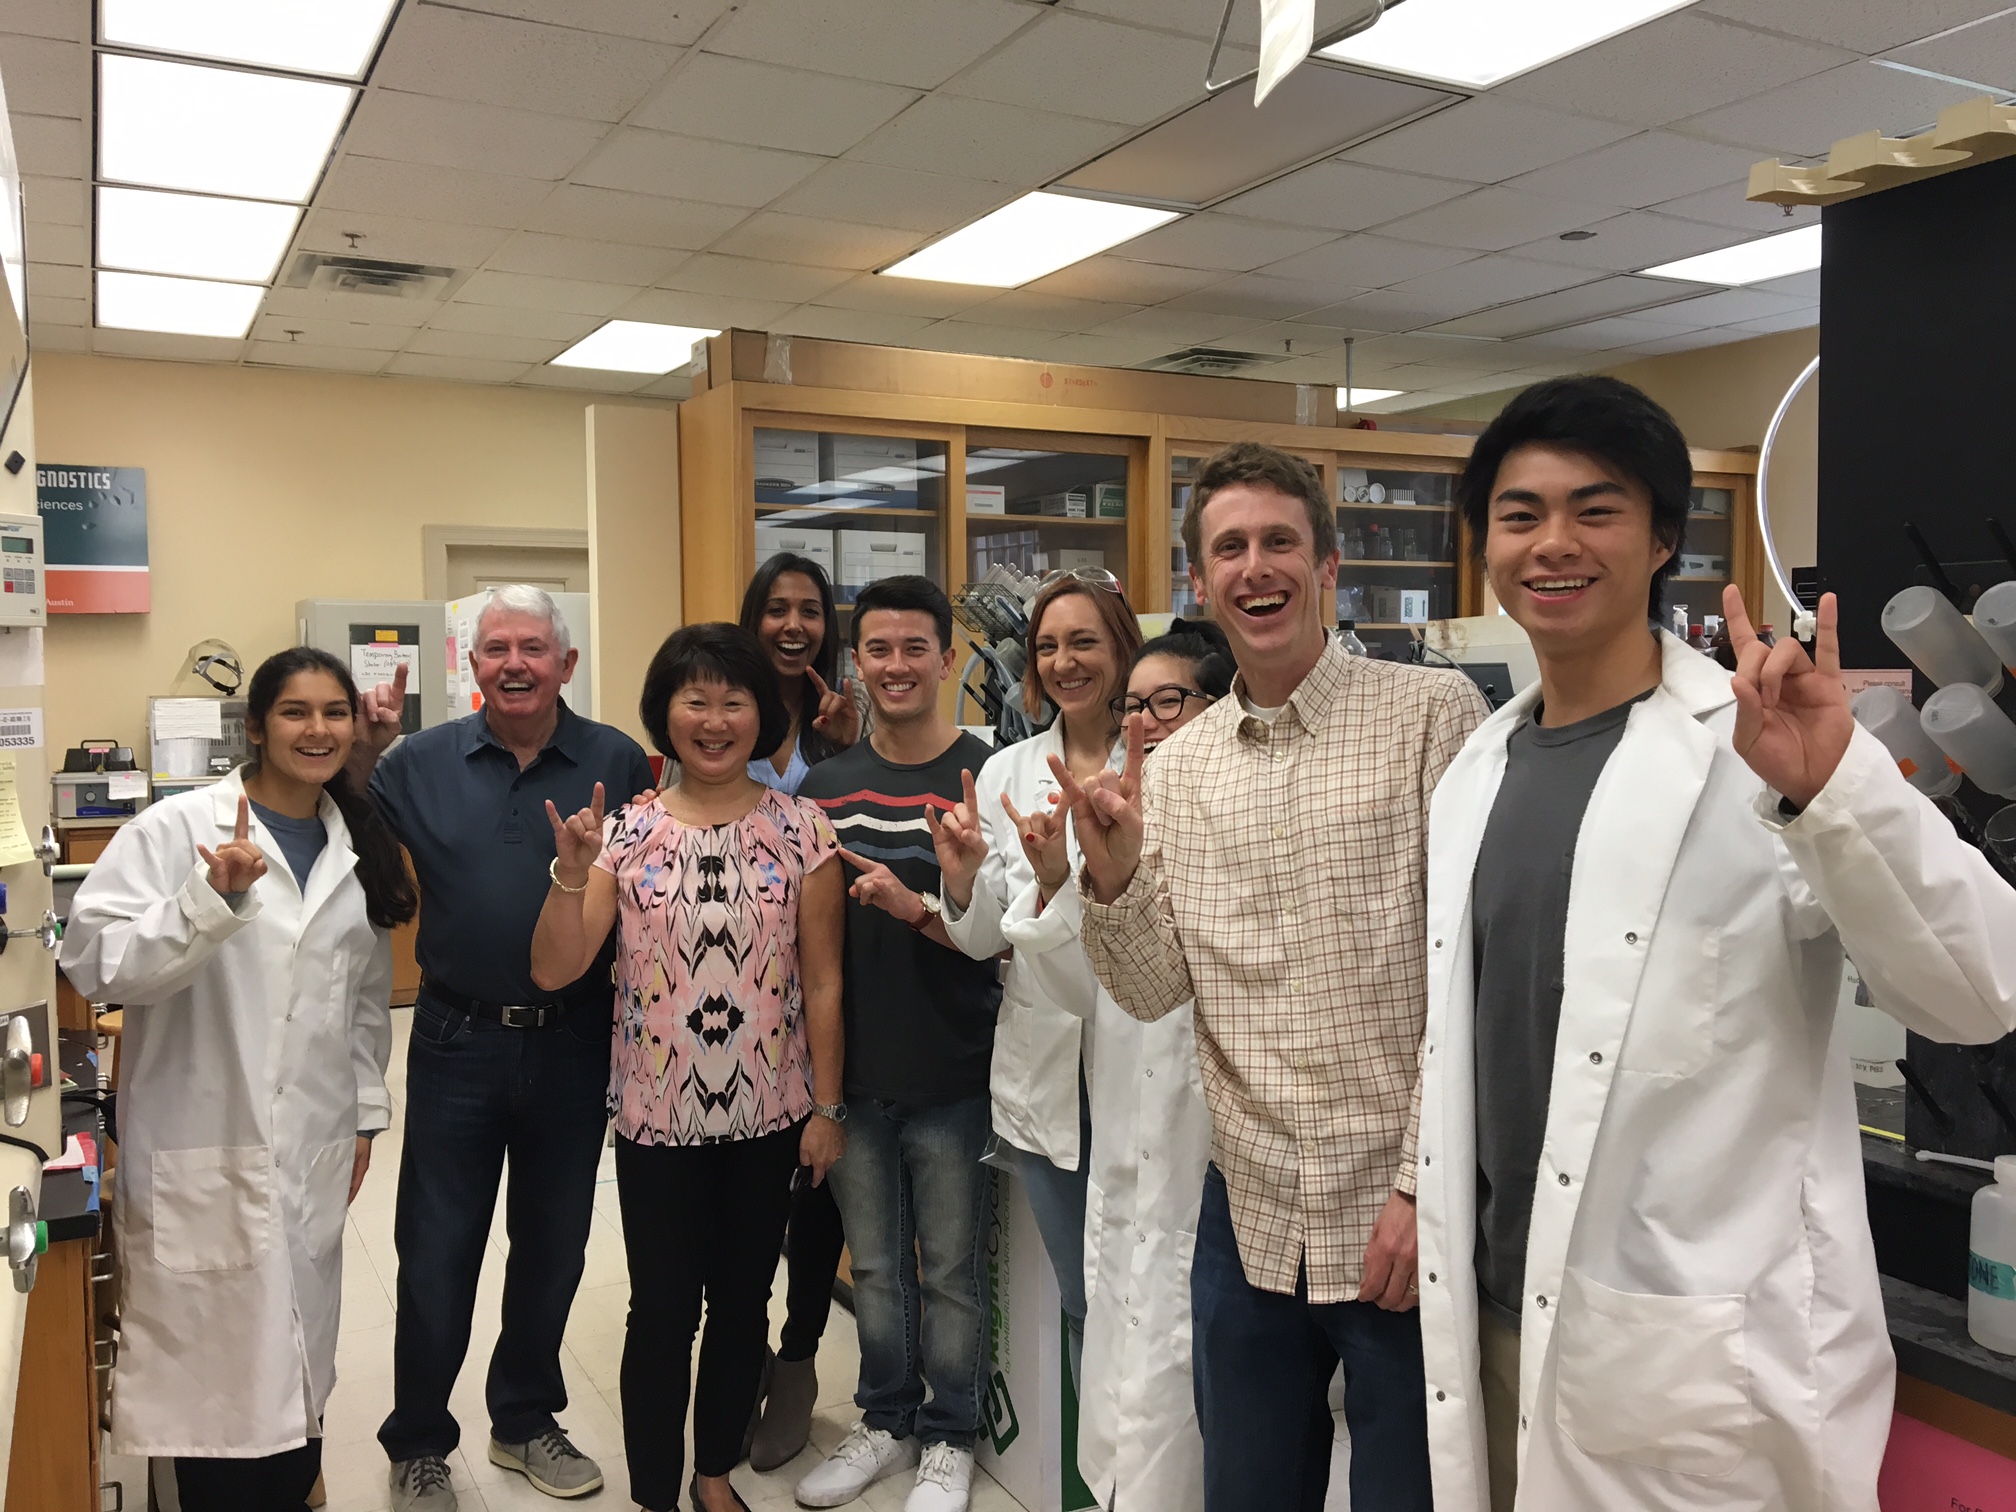 A group of adults and students posing for a photo in a lab, with some students wearing white lab coats